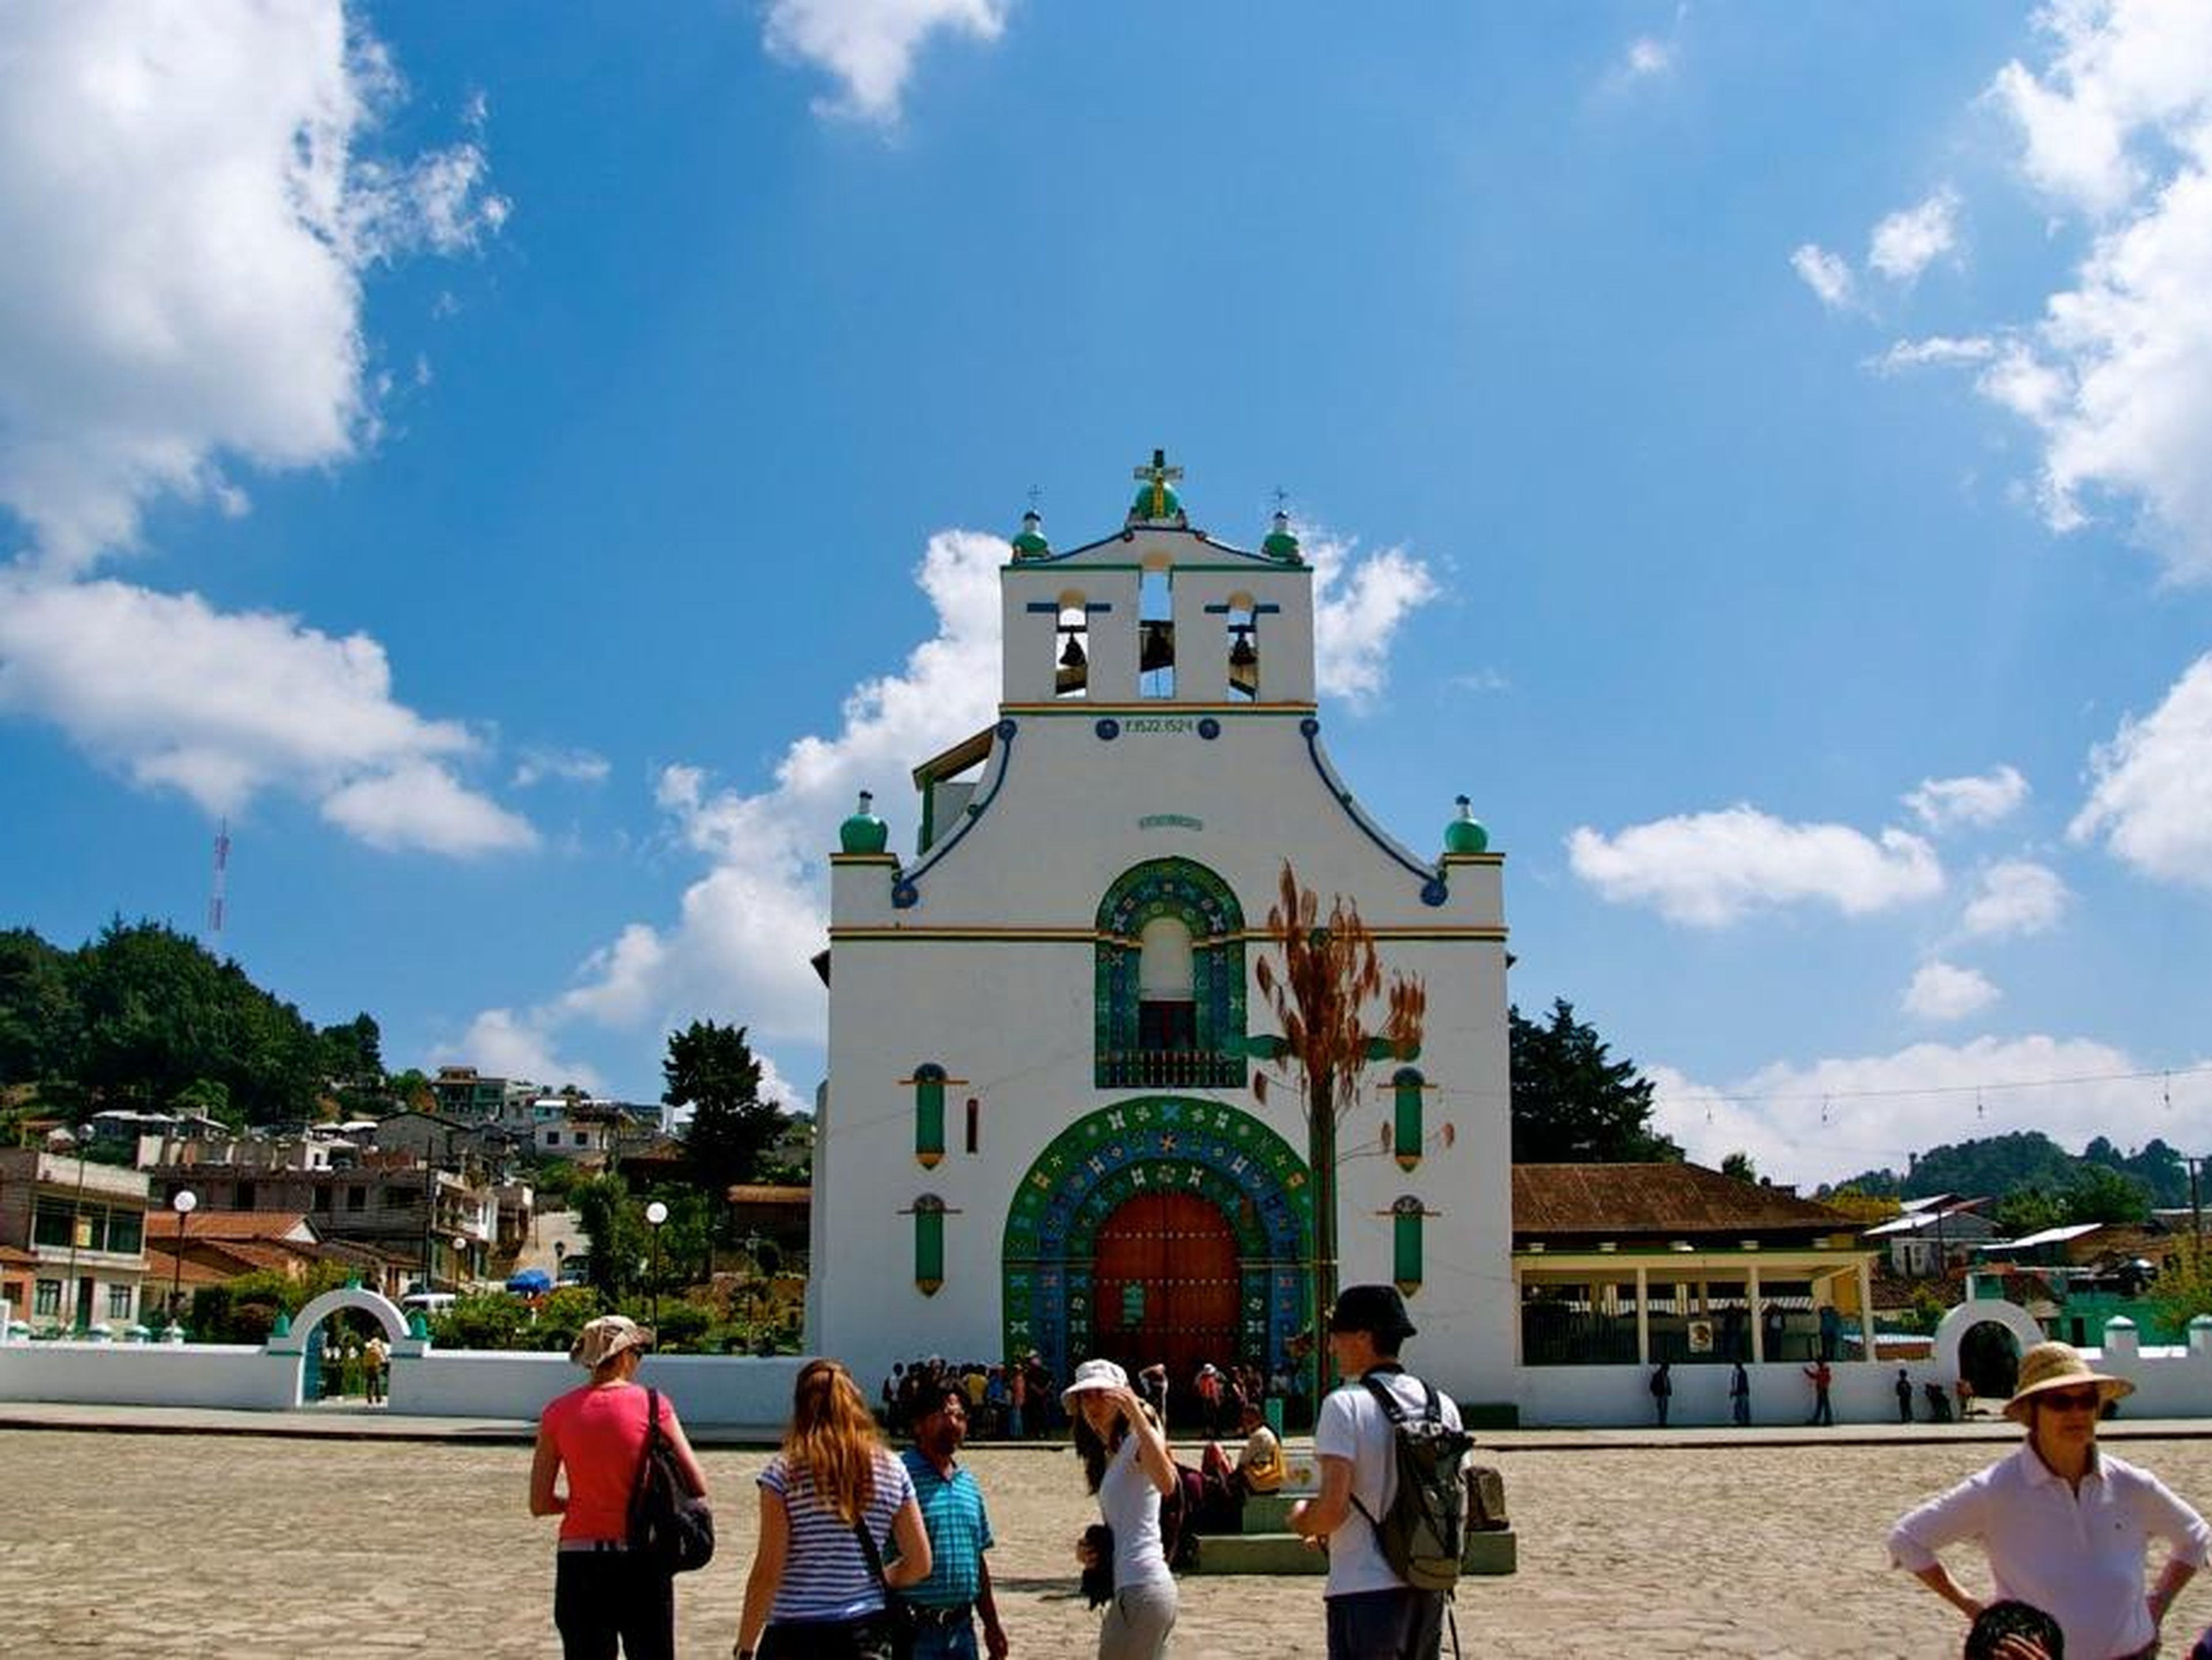 On "Household Name," we learned about Mexico's so-called "Coca-Cola Church," which uses the soda in religious ceremonies.